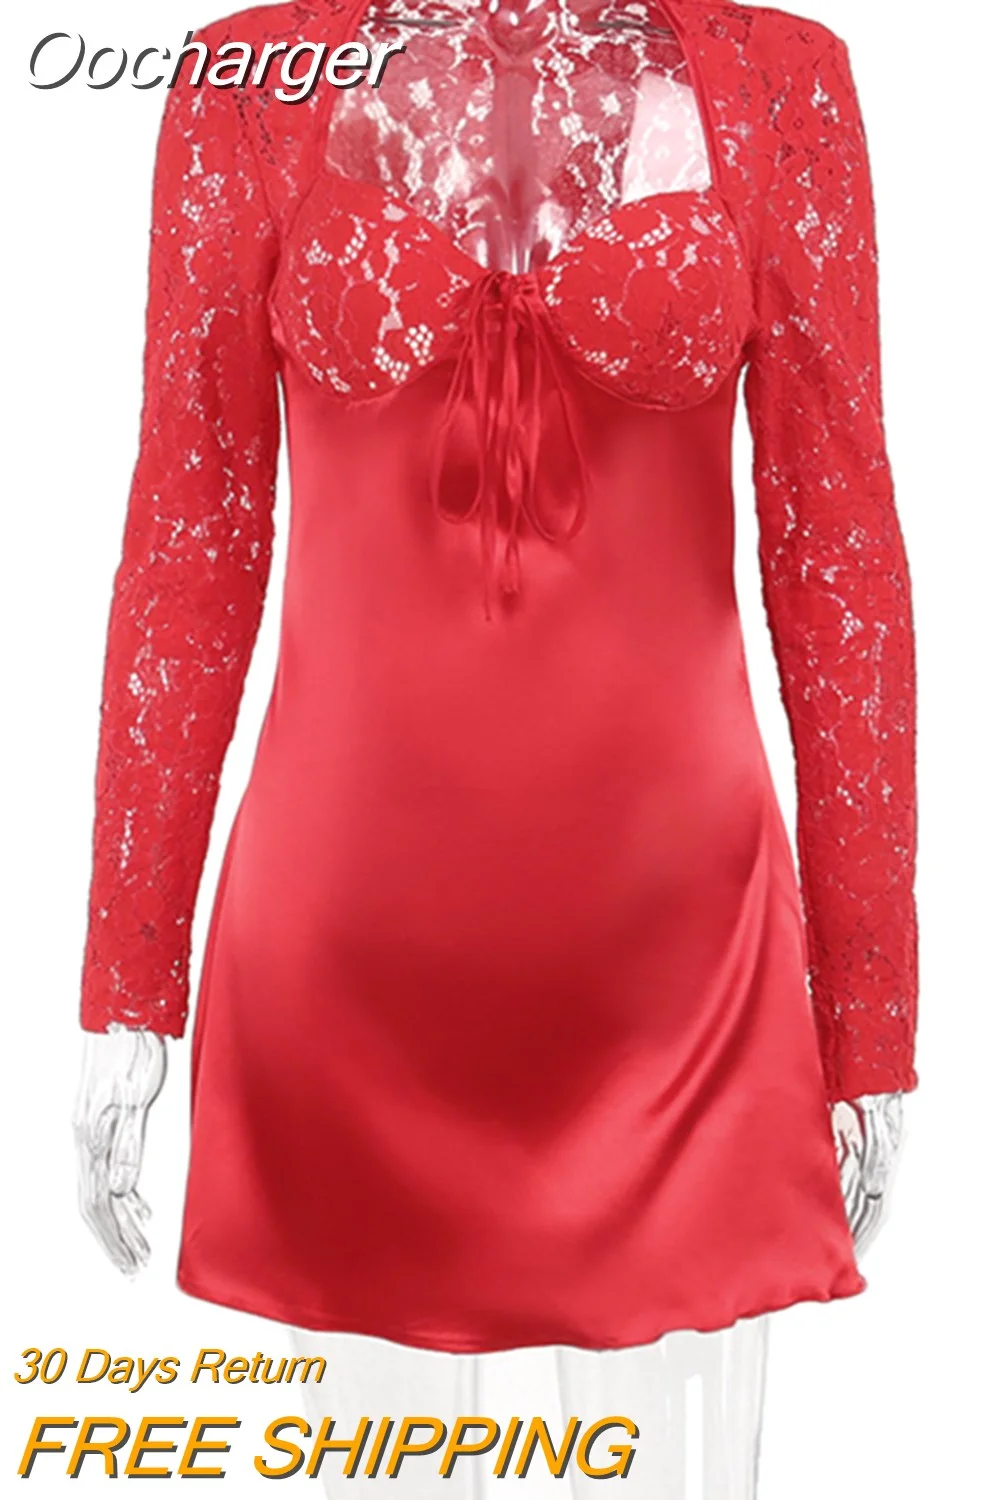 Oocharger Red Lace Sexy Mini Dress For Women Robe Full Sleeve Square Collar Lace-up Wrap Hip Bodycon Club Party Dress Vestido